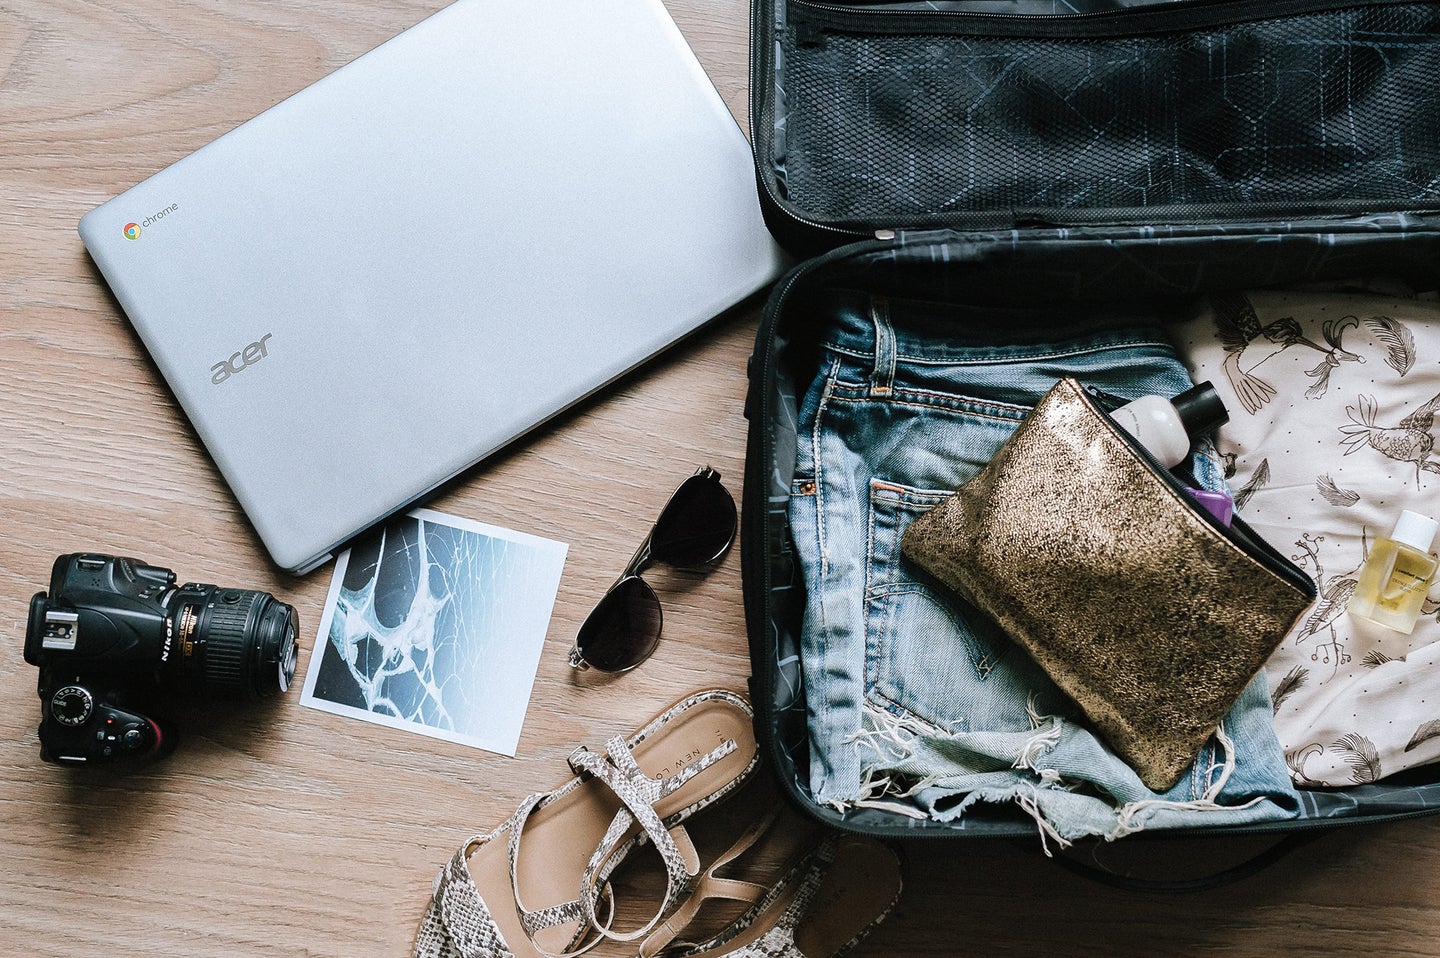 suitcase, laptop, sunglasses, camera, and other travel gear for the best gifts for travelers